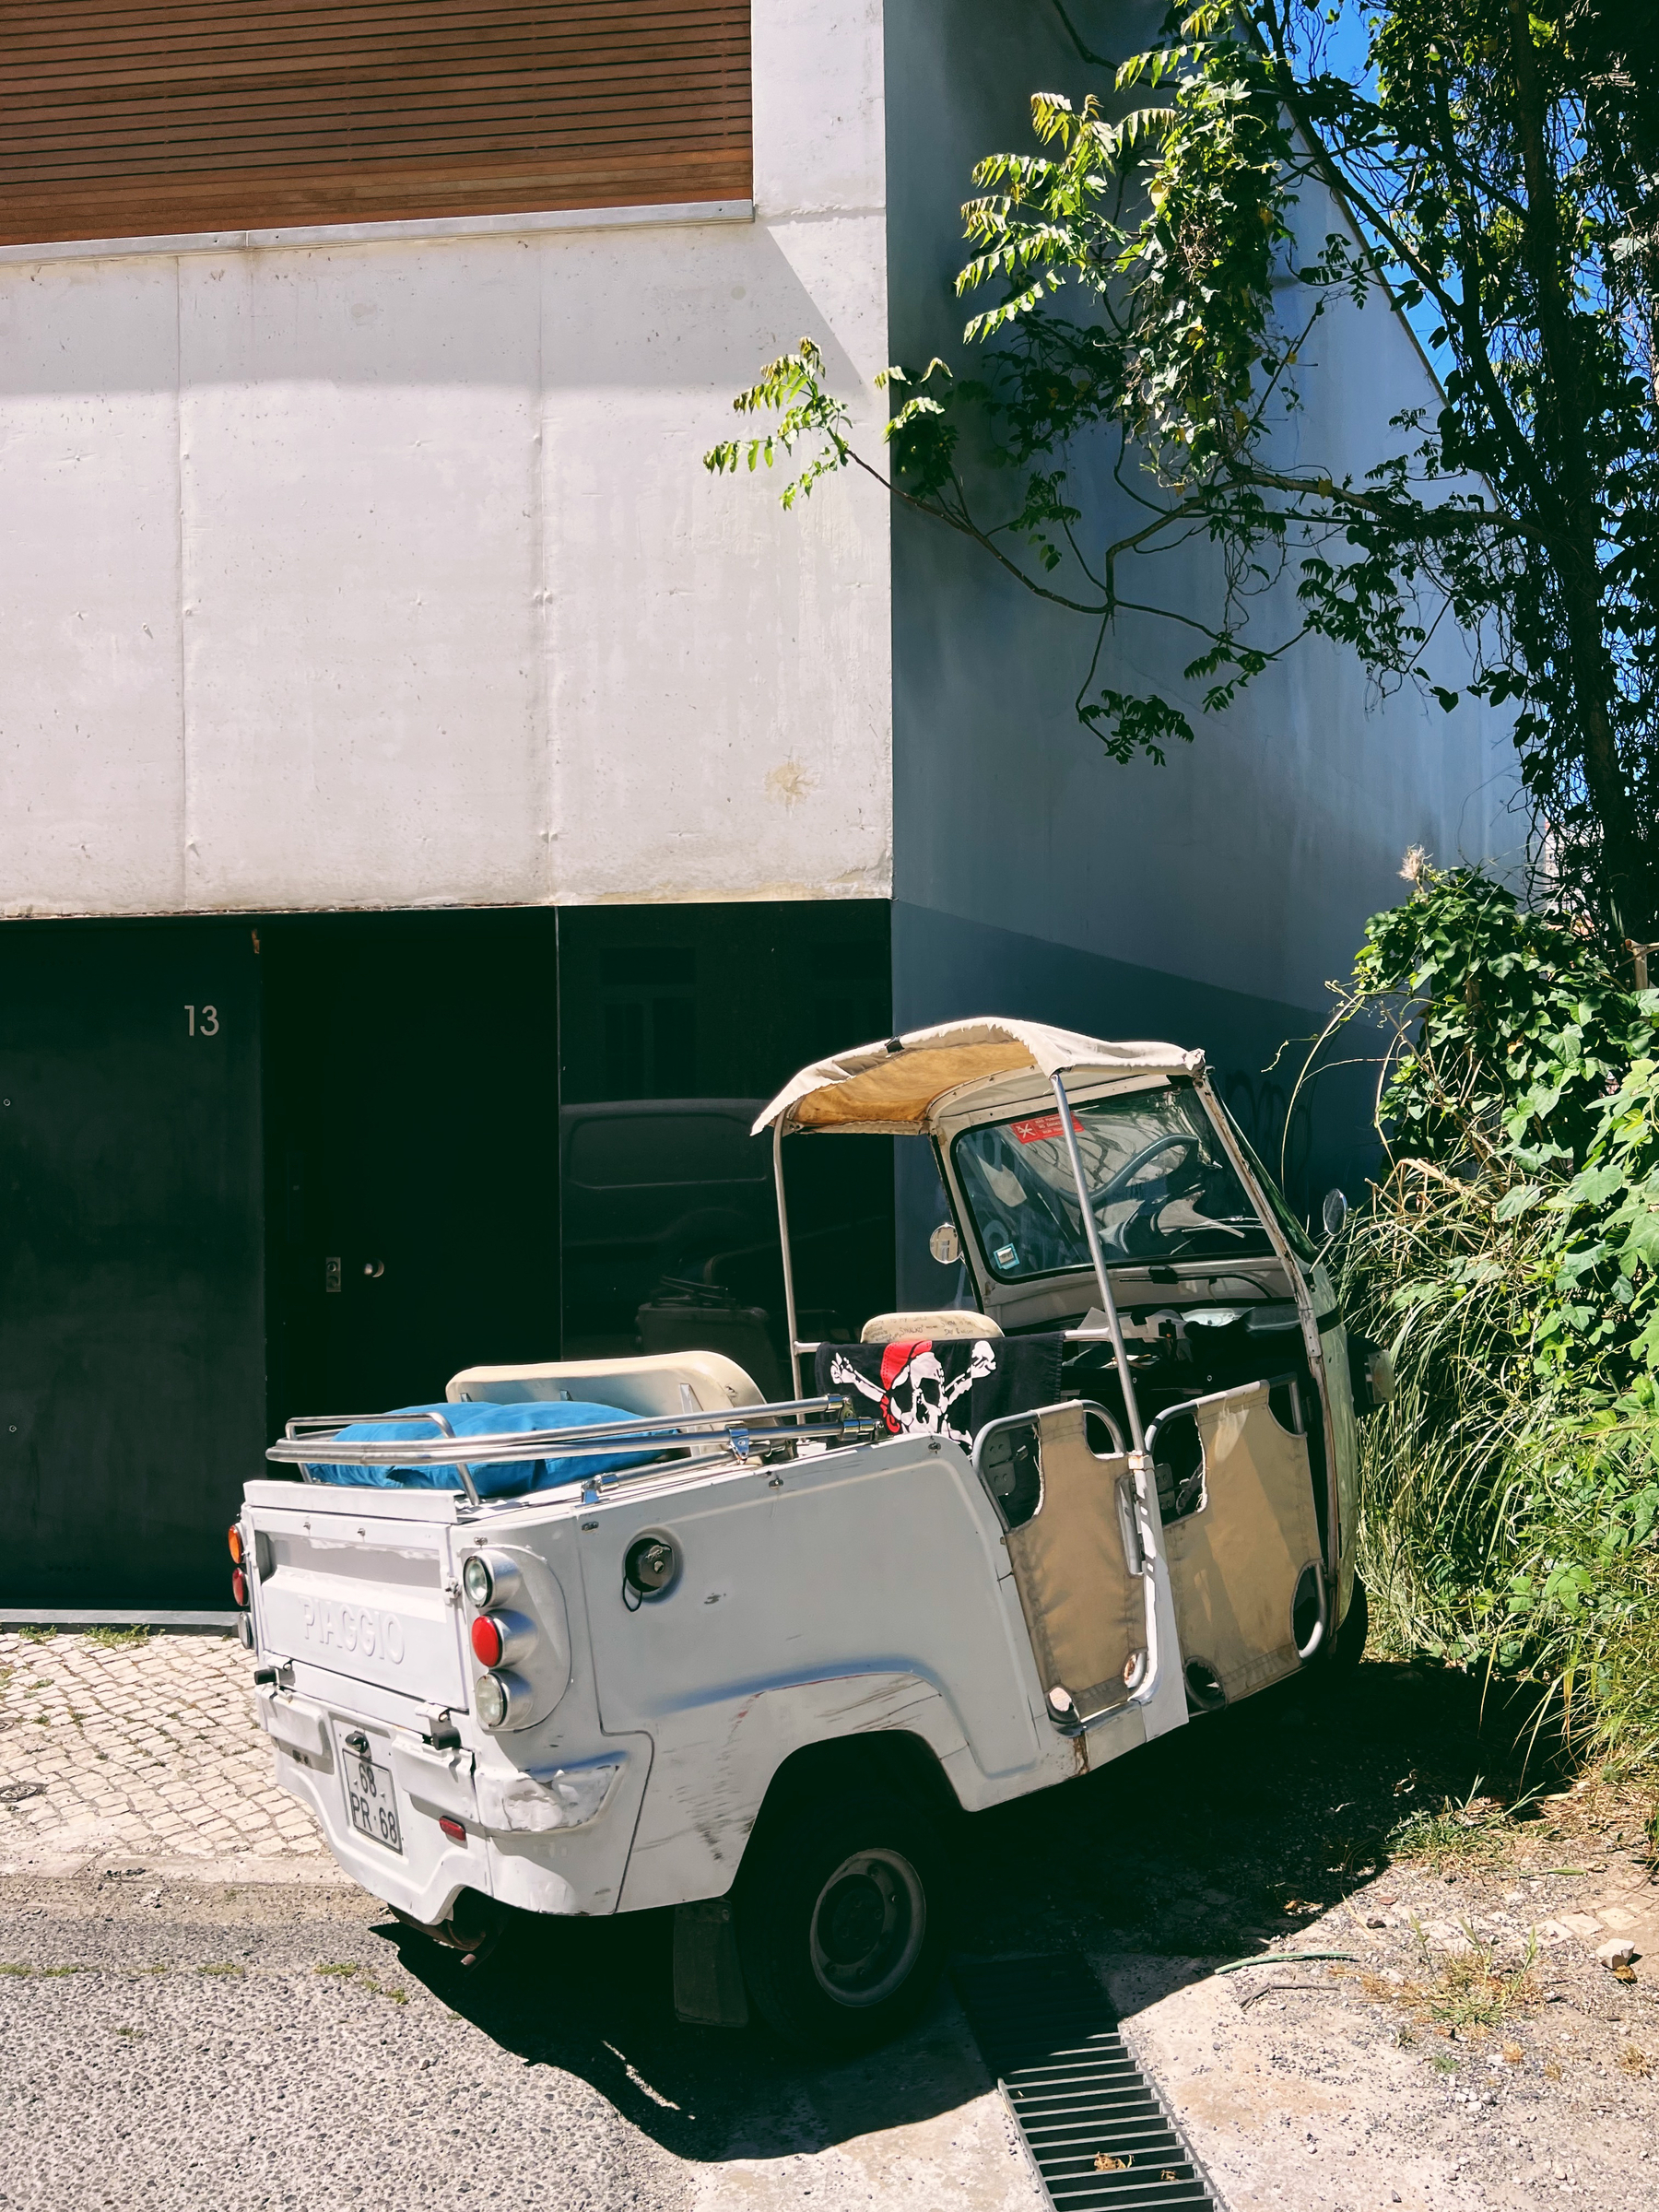 a tuk-tuk with a pirate’s skull flag, parked in the street